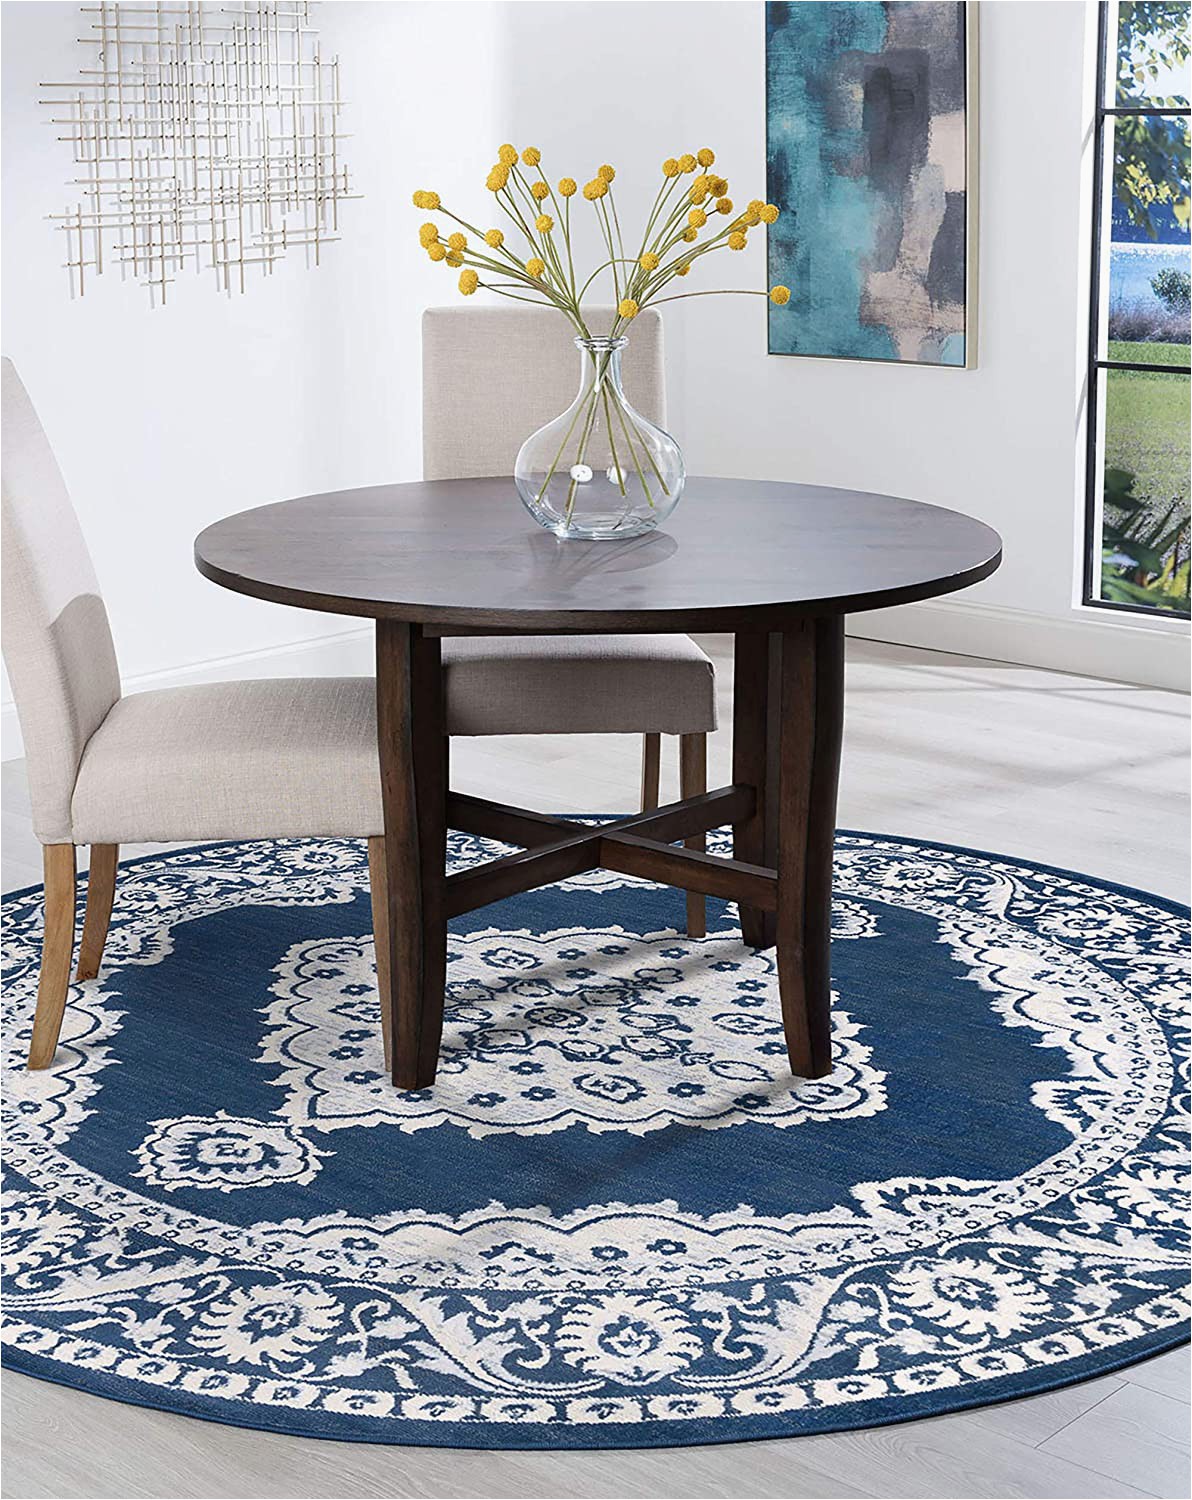 3 Foot Round area Rugs Tayse Galilea Navy 6 Foot Round area Rug for Living Bedroom or Dining Room Traditional Medallion